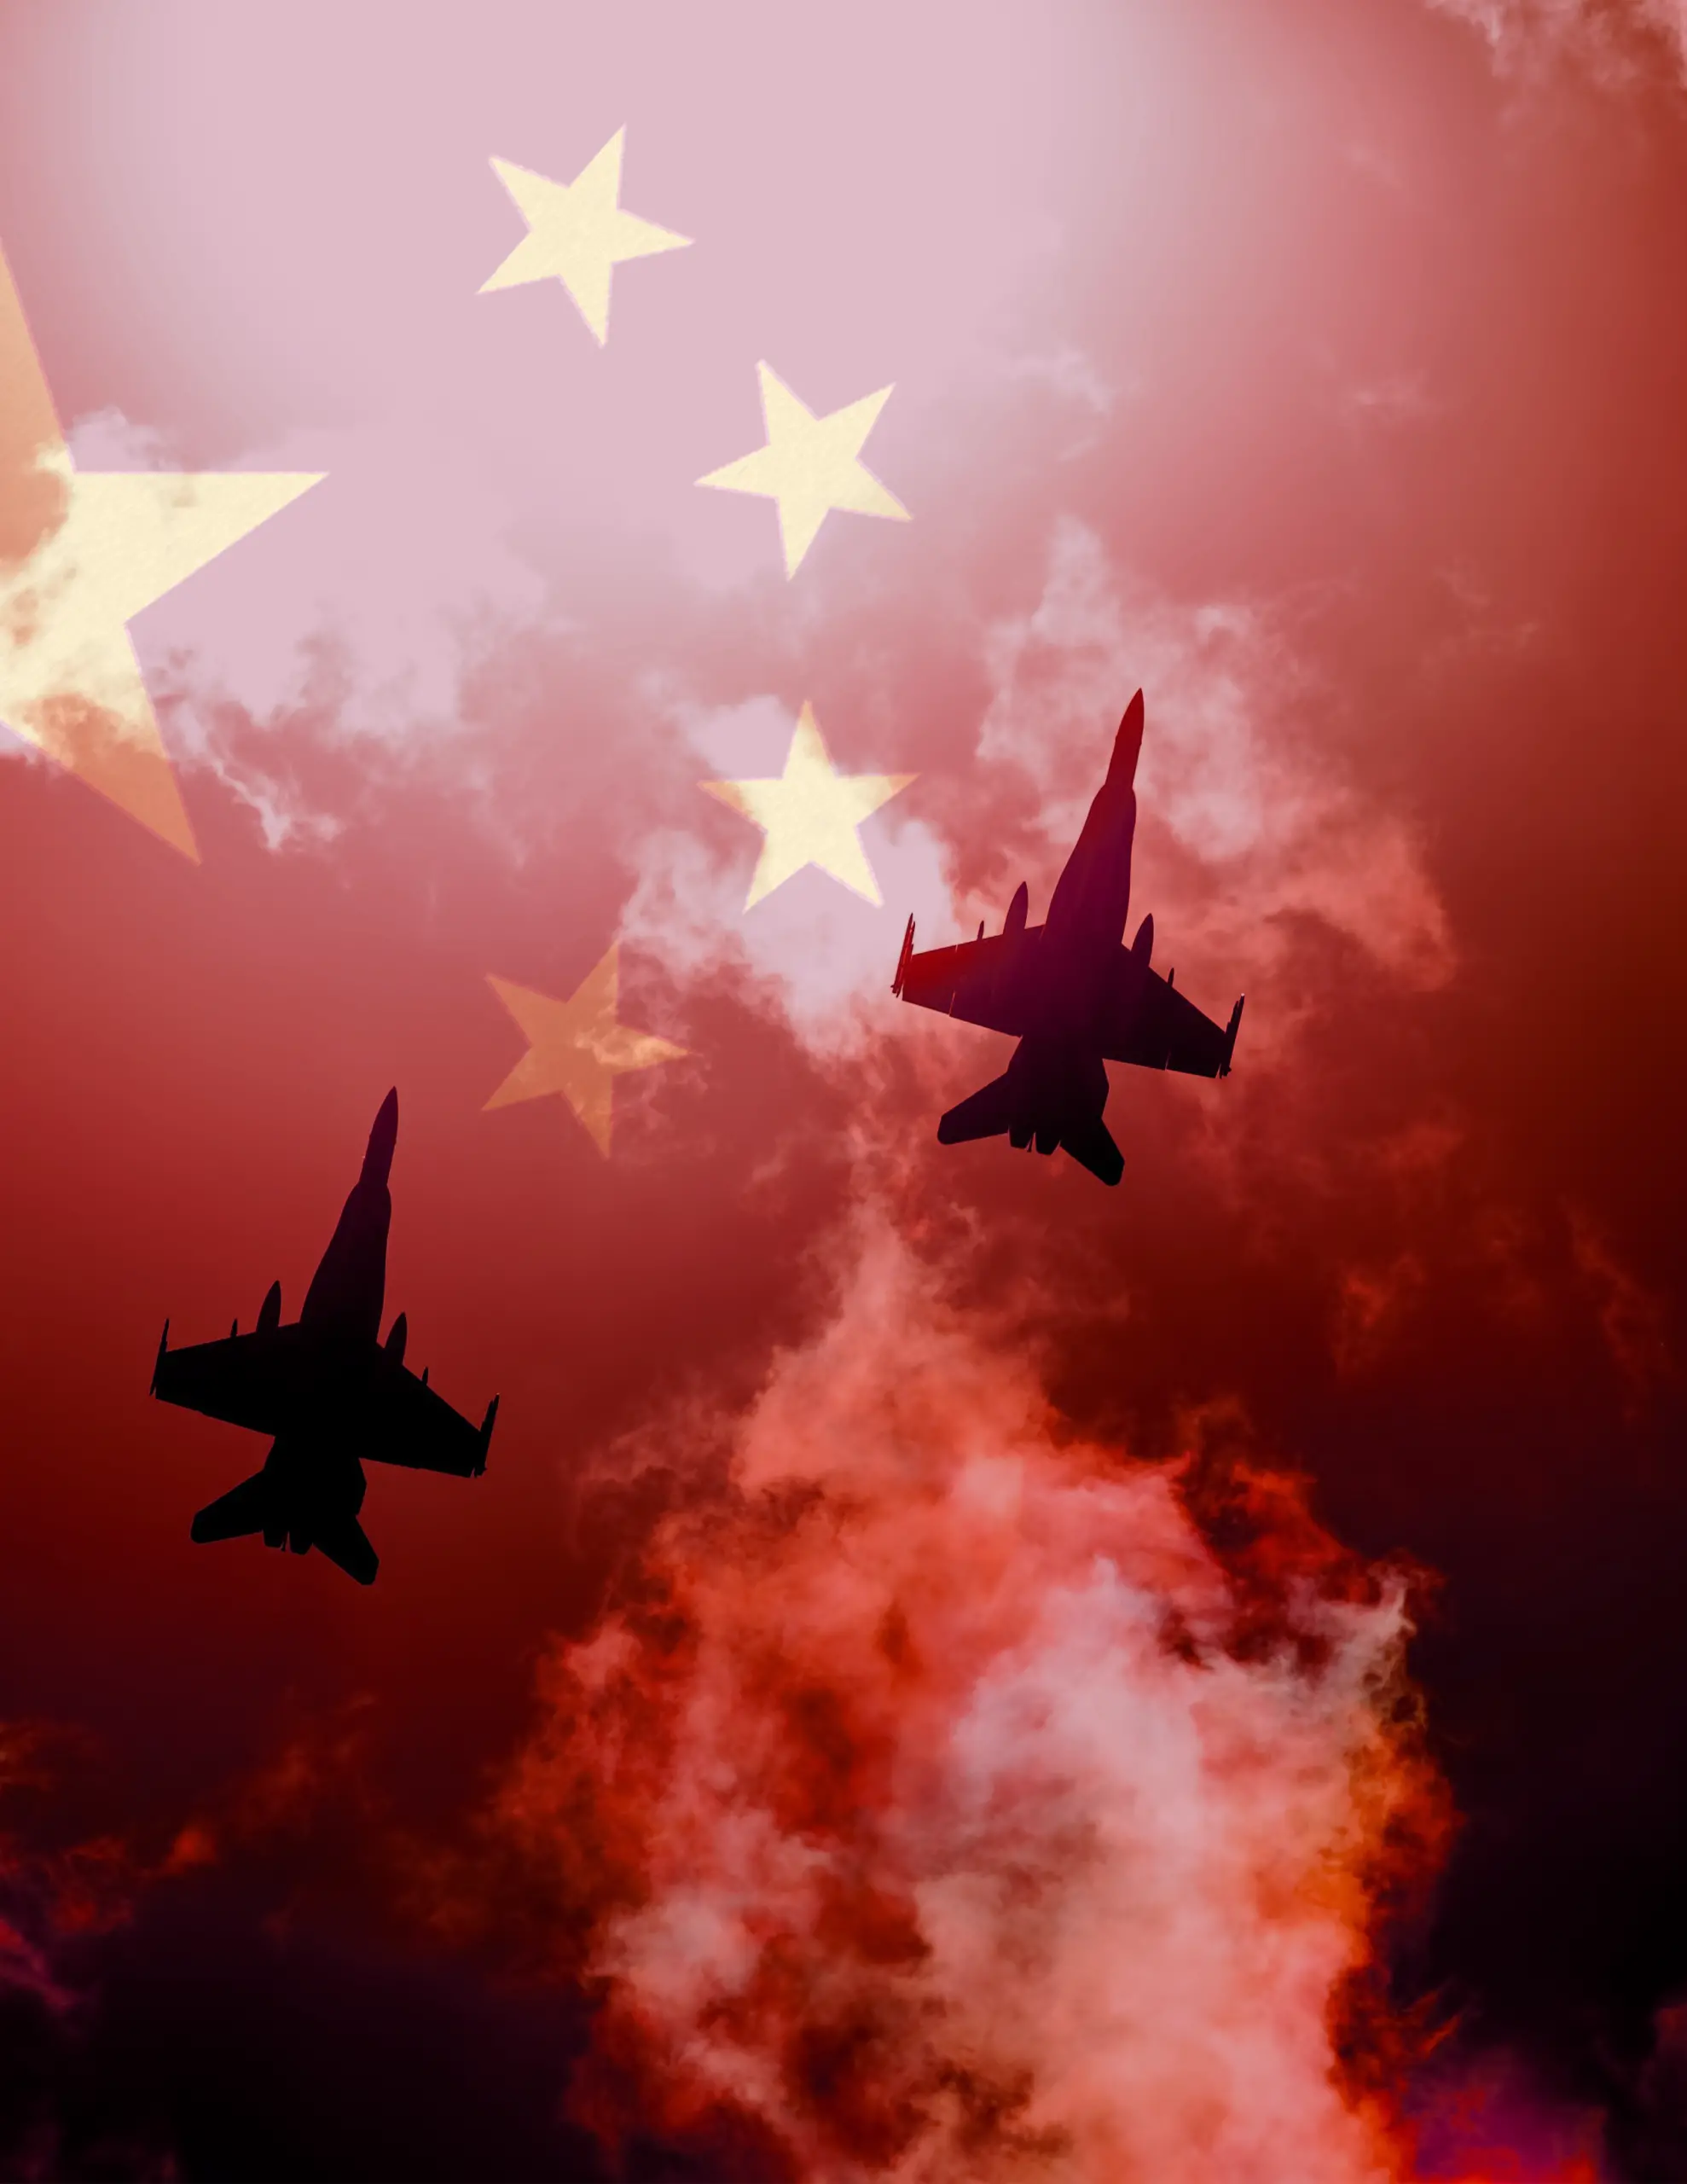 Image of two jets in the sky with a red overlay and the flag of China in the background.